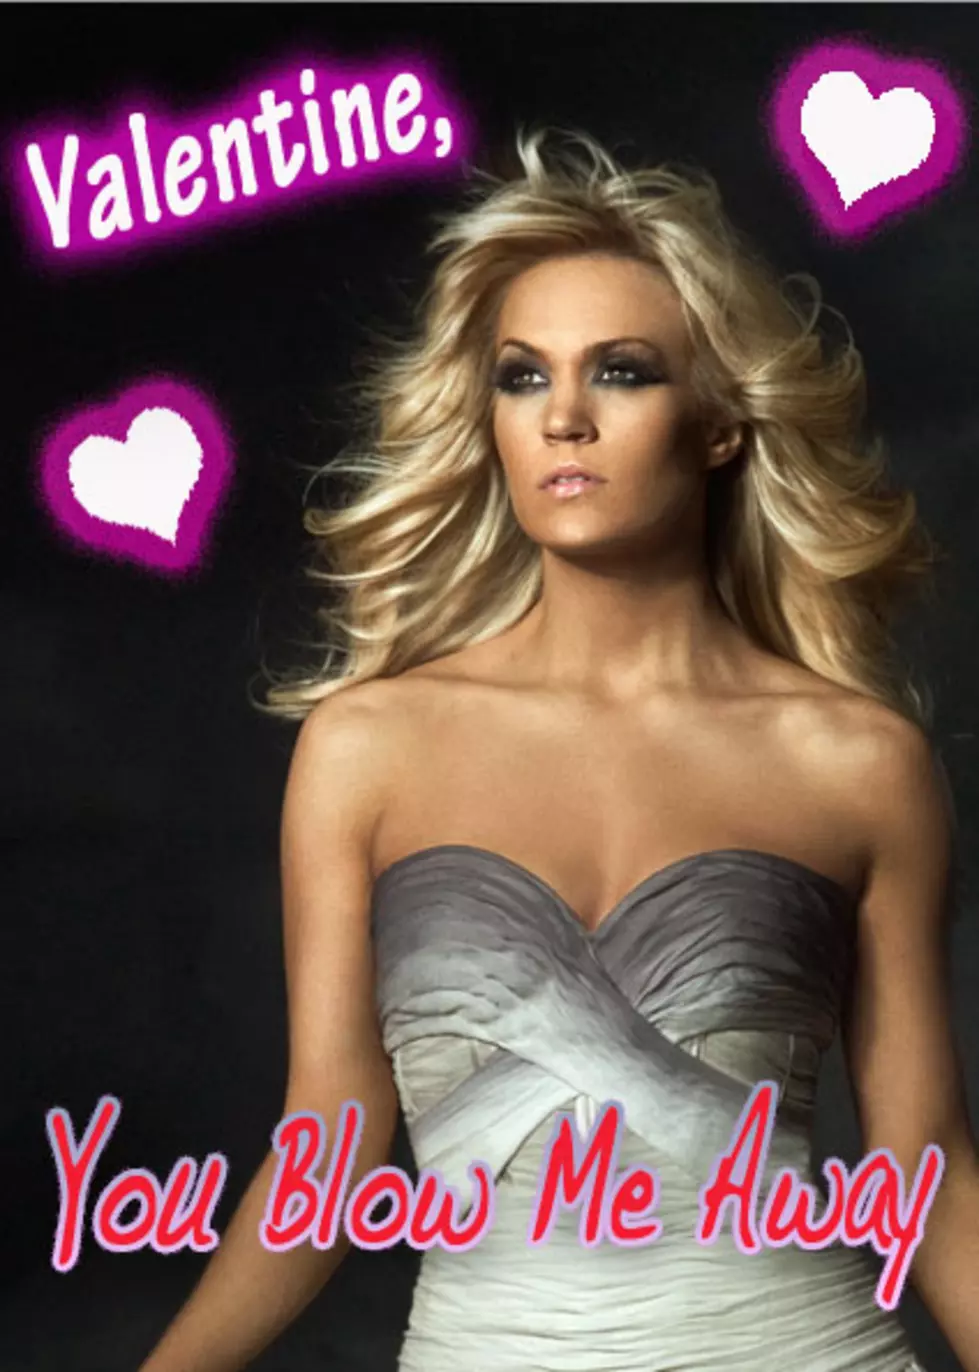 Check Out Carrie Underwood’s Valentine’s Day Card